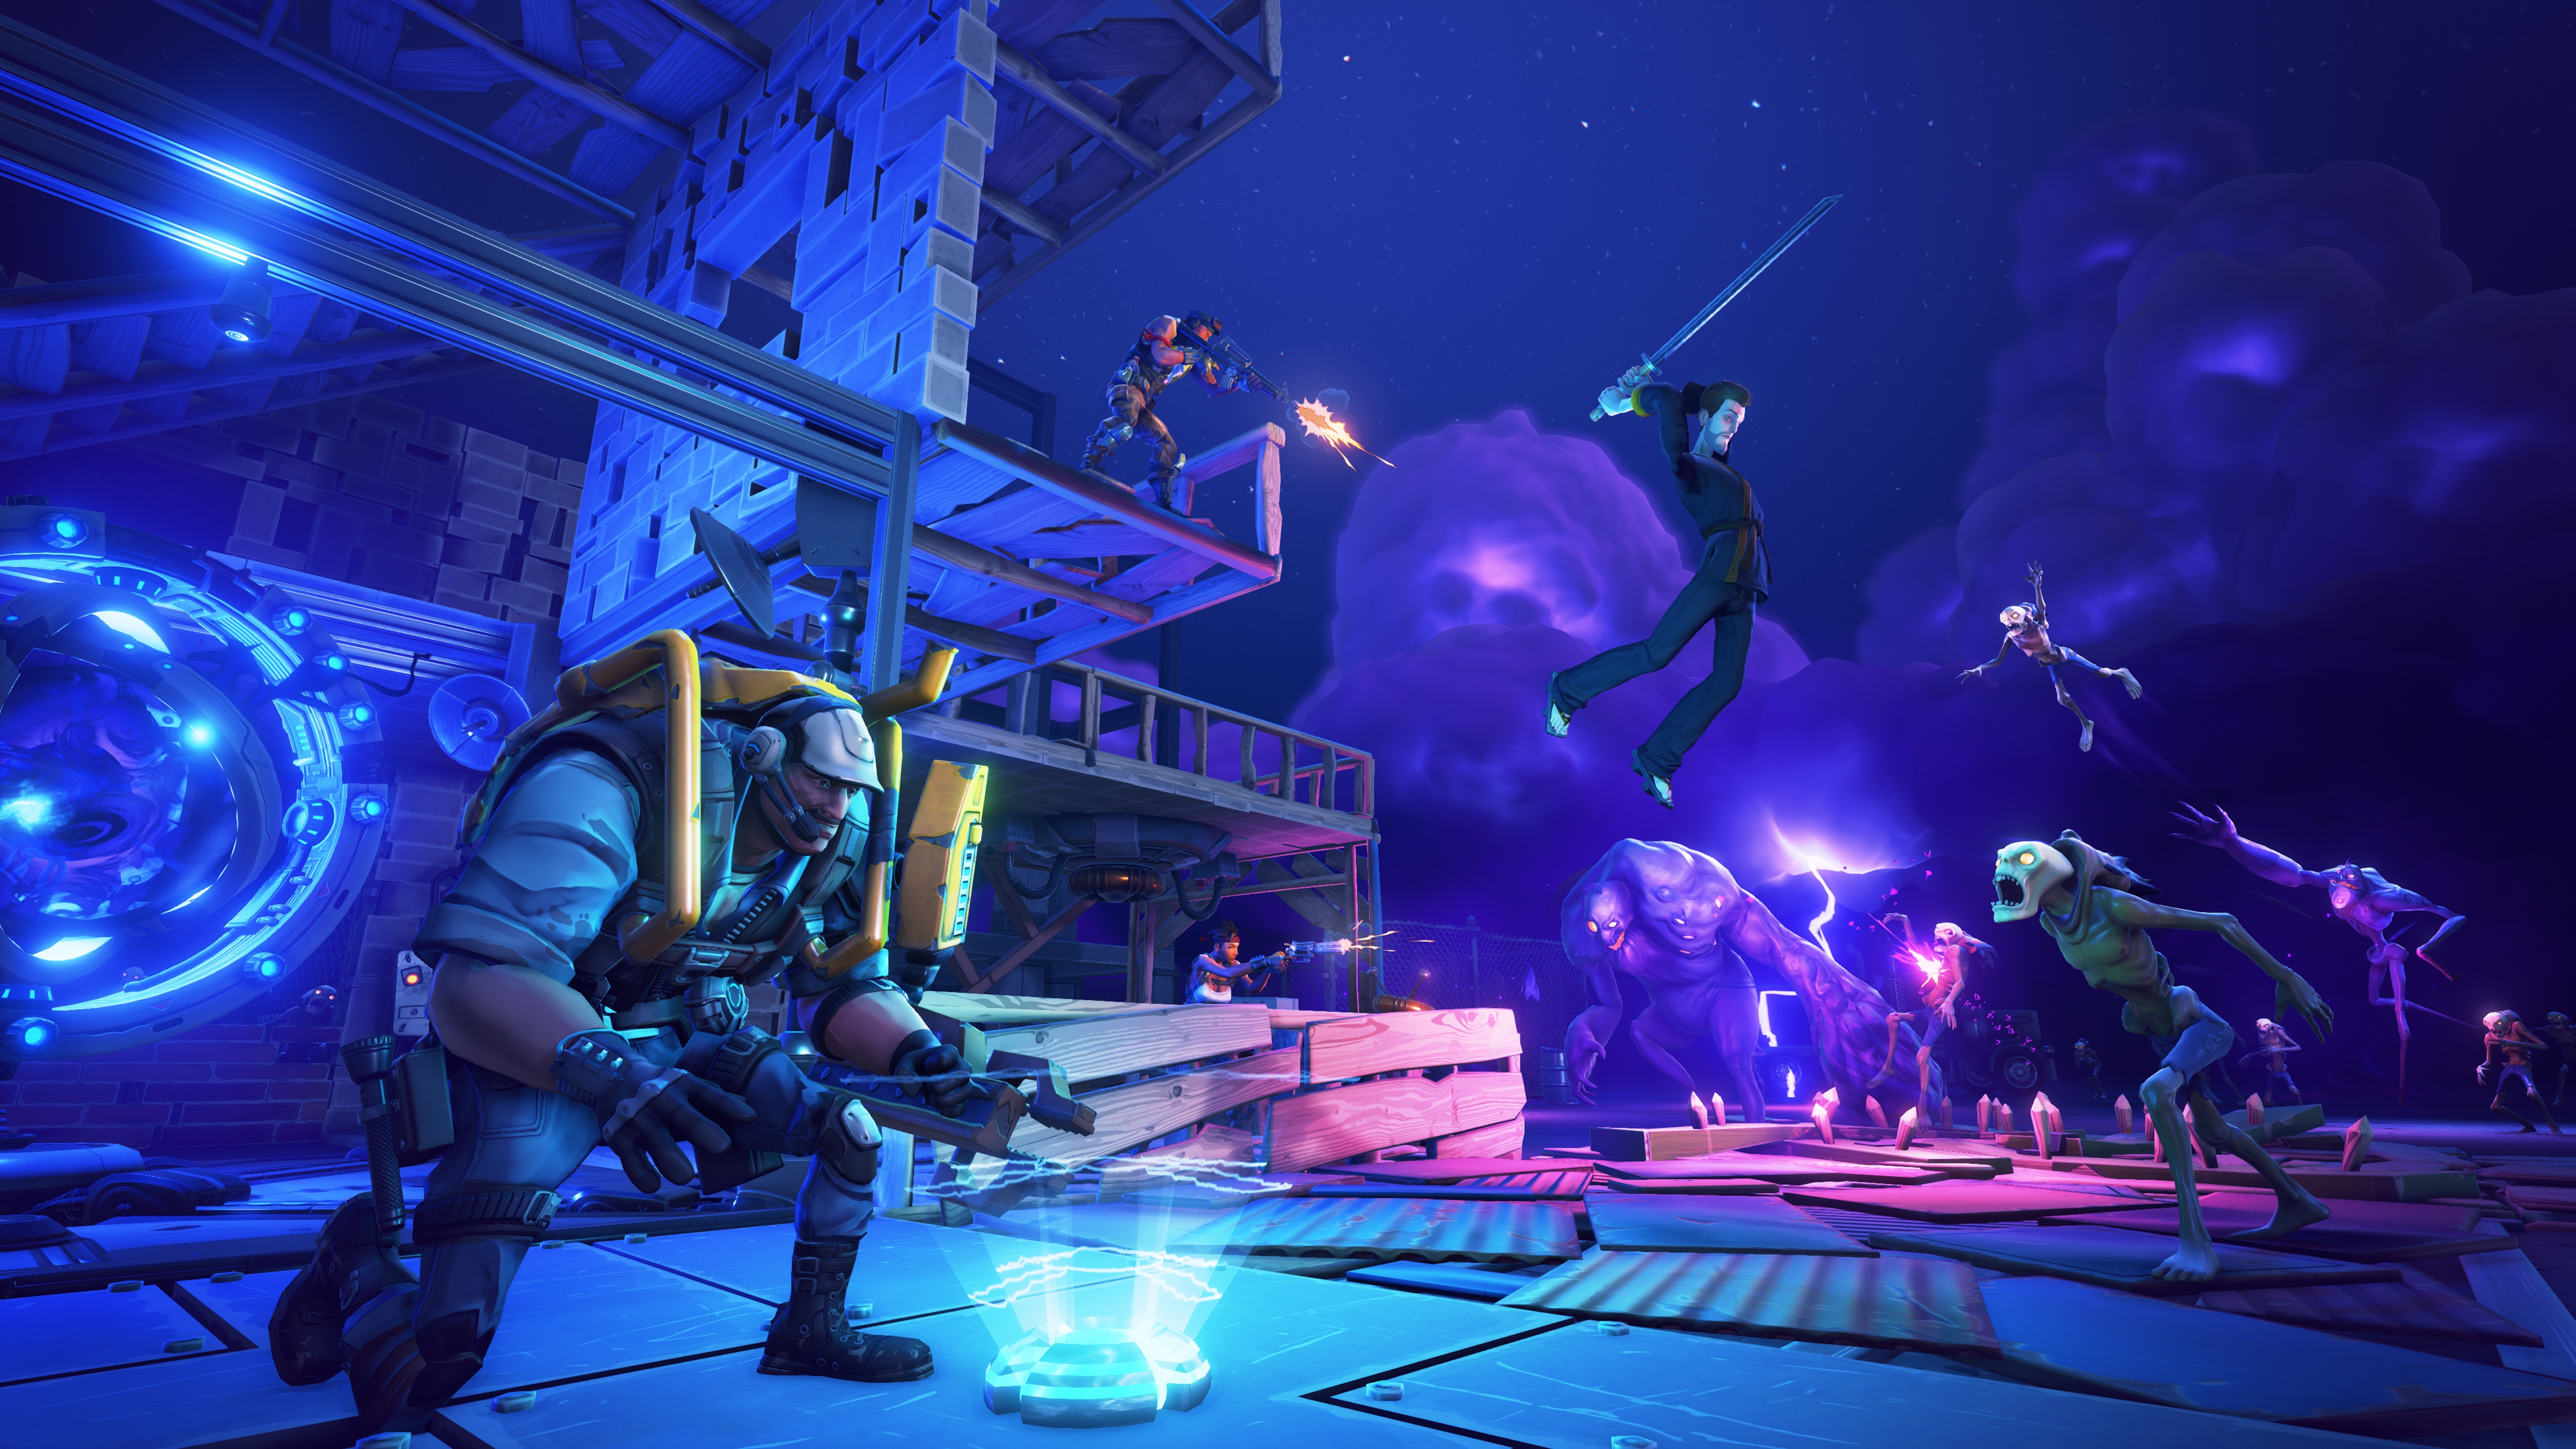 Epic Games Presents Fortnite's 6th Birthday Event and Challenges